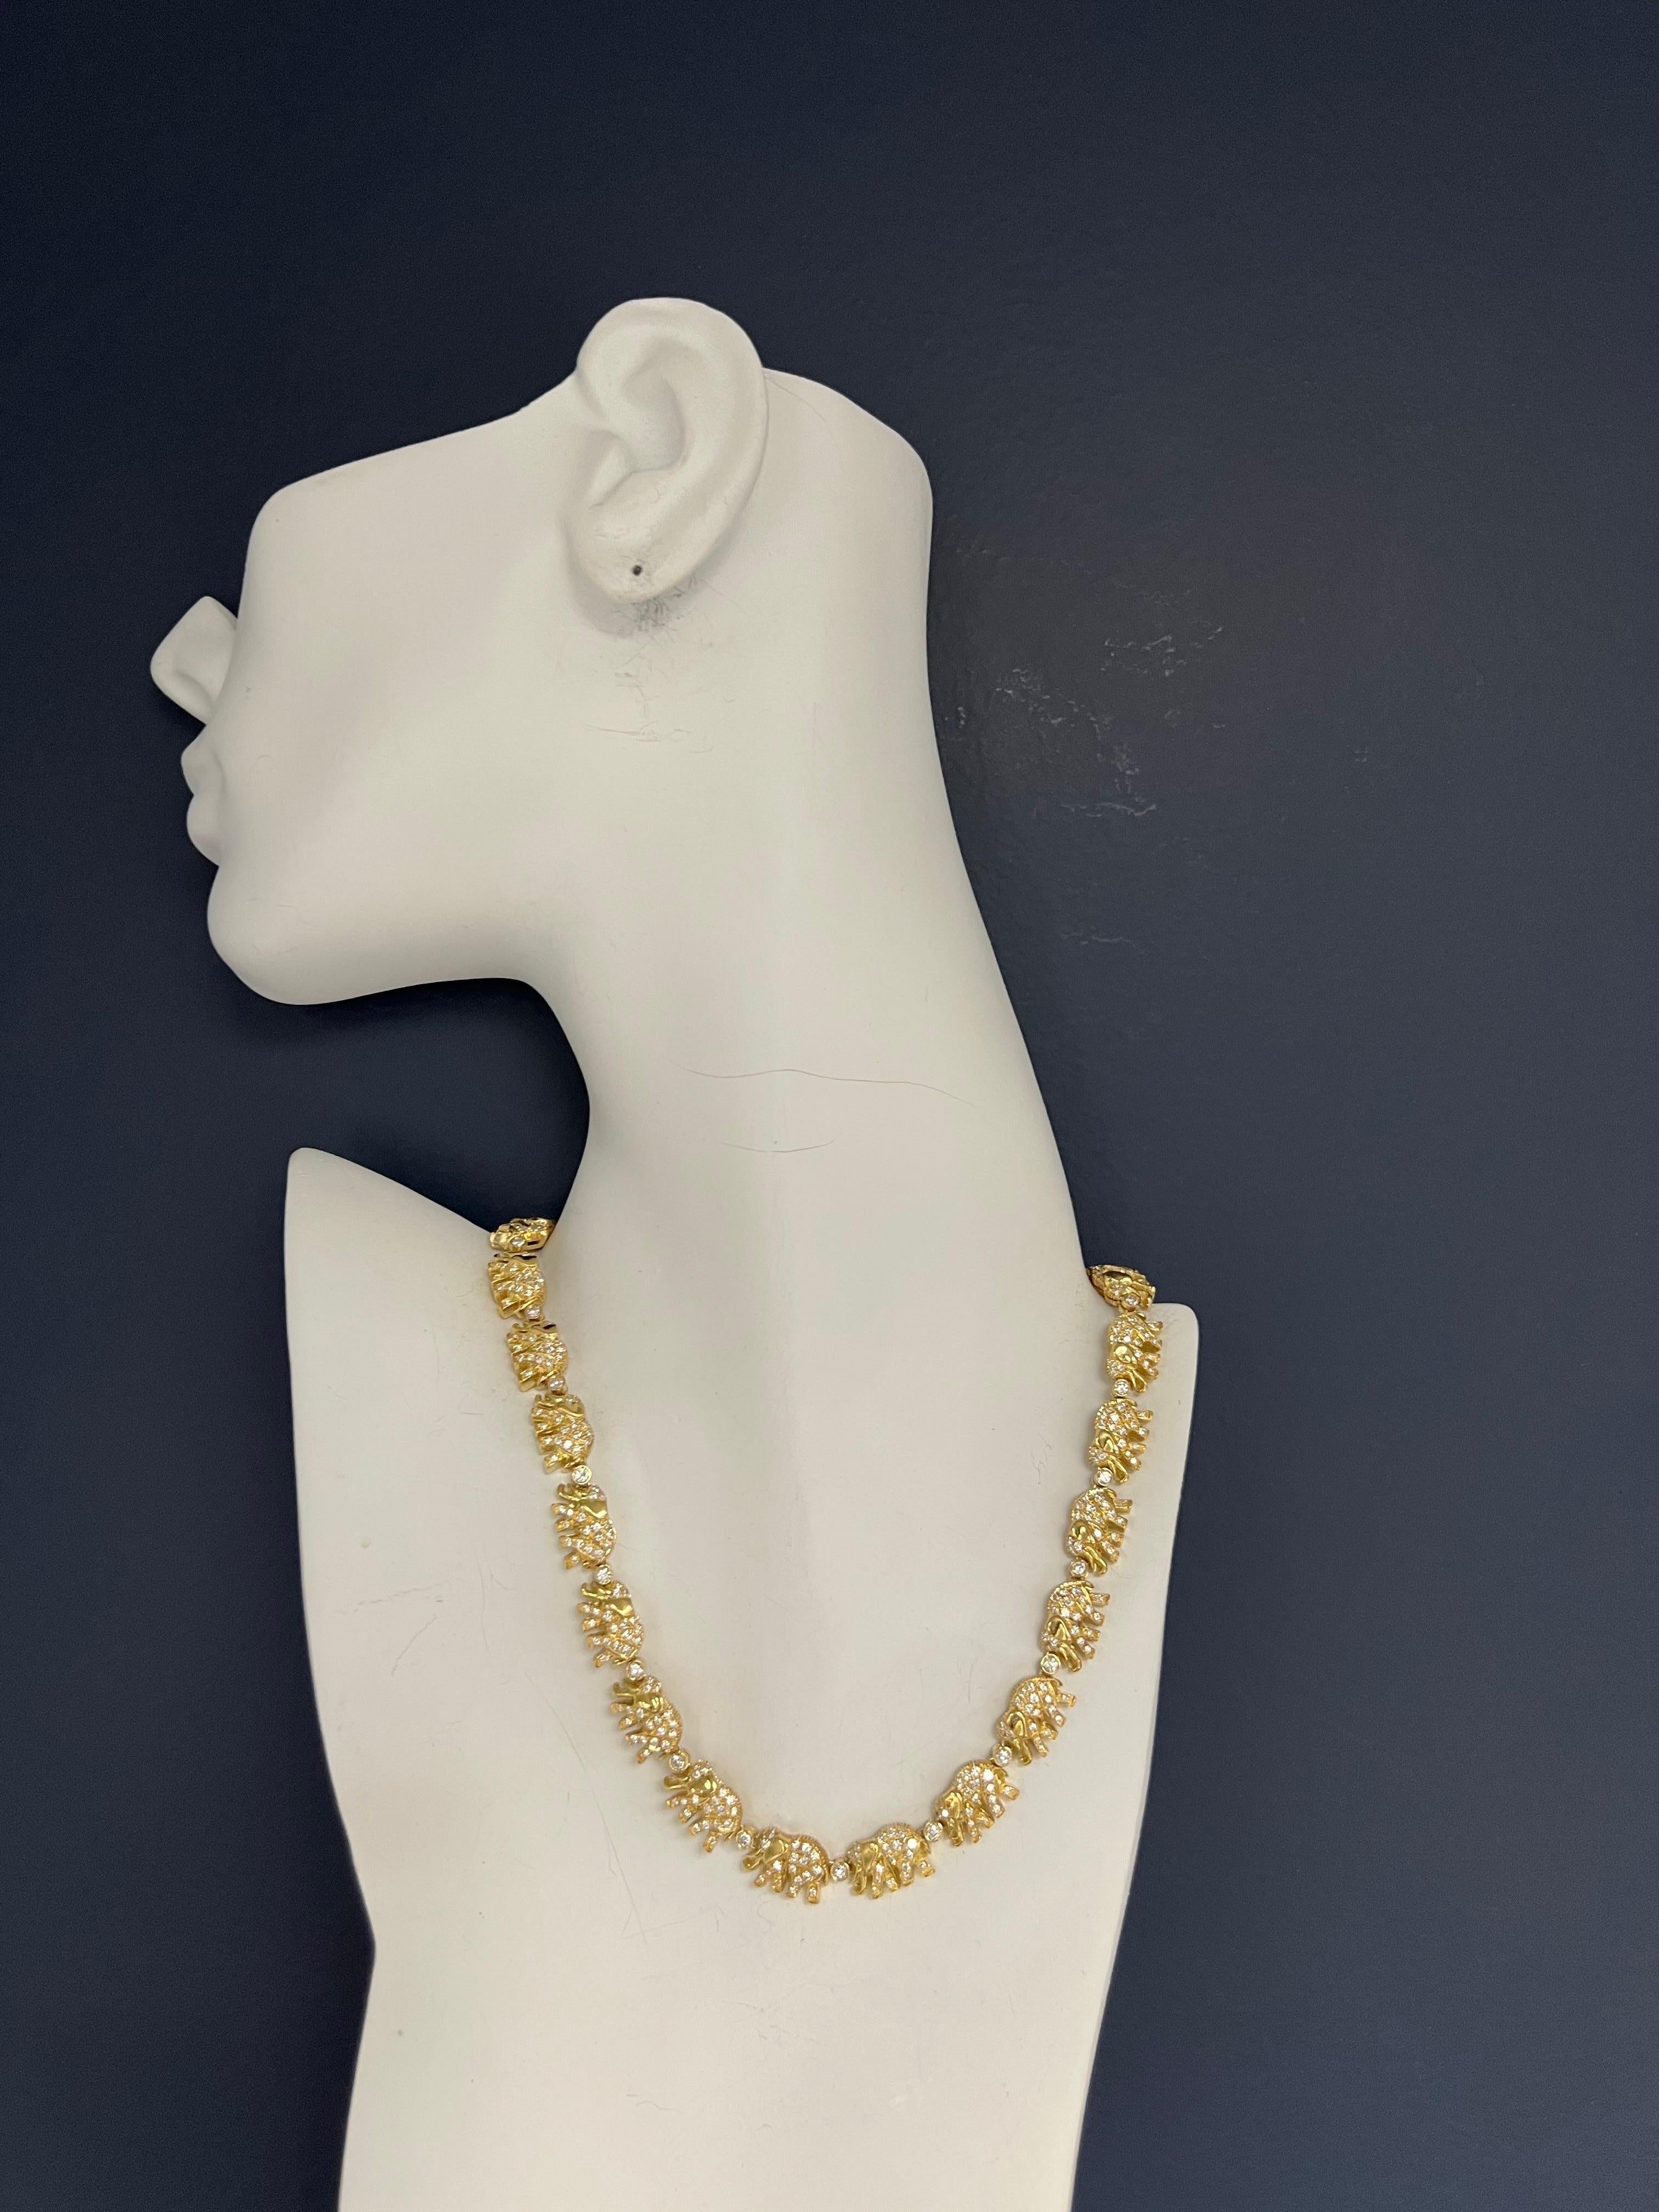 Magnificent 5.50 Carat (appx) Natural Diamond Elephant Necklace set in 18k Yellow Gold. There are 24 elephant links. 

The piece is set with 456 Natural Colorless Round Brilliant Diamonds weighing 5.50 carats, the diamonds are VS-VVS in clarity (all